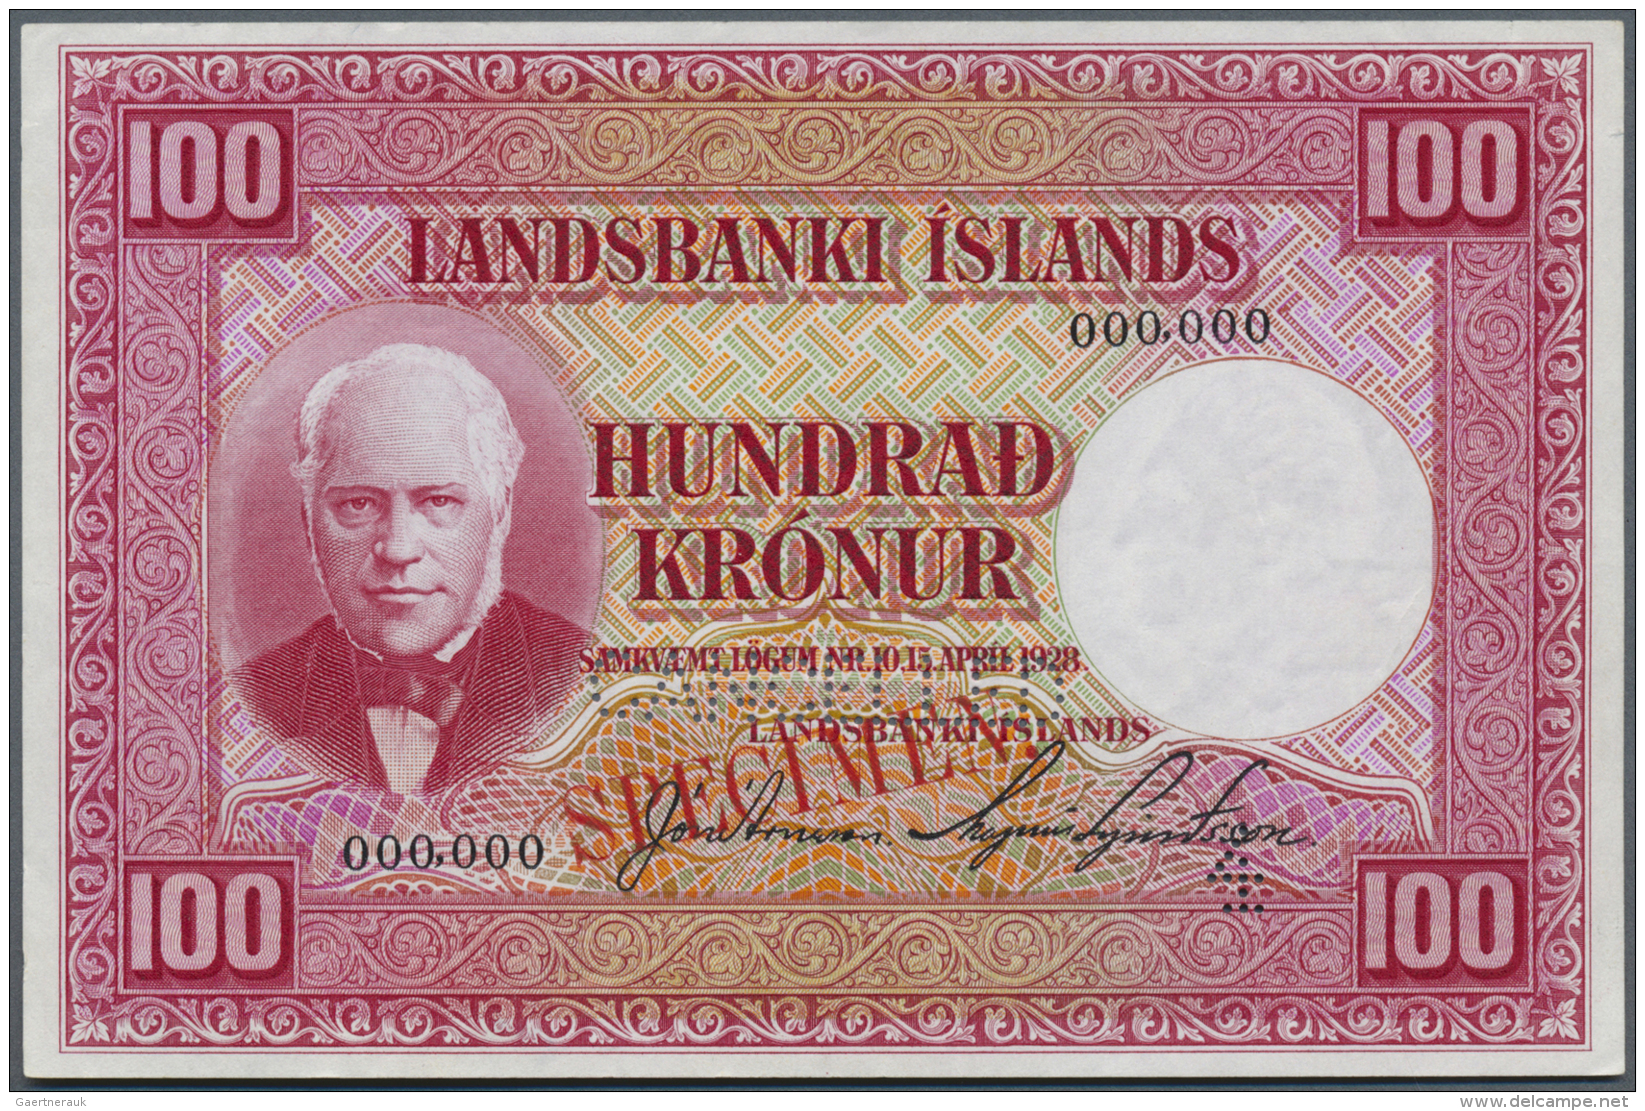 Iceland / Island: 100 Kronur 1928 Specimen P. 30s With "cancelled" Perforation And Red Specimen Overprint On Front And B - Islanda